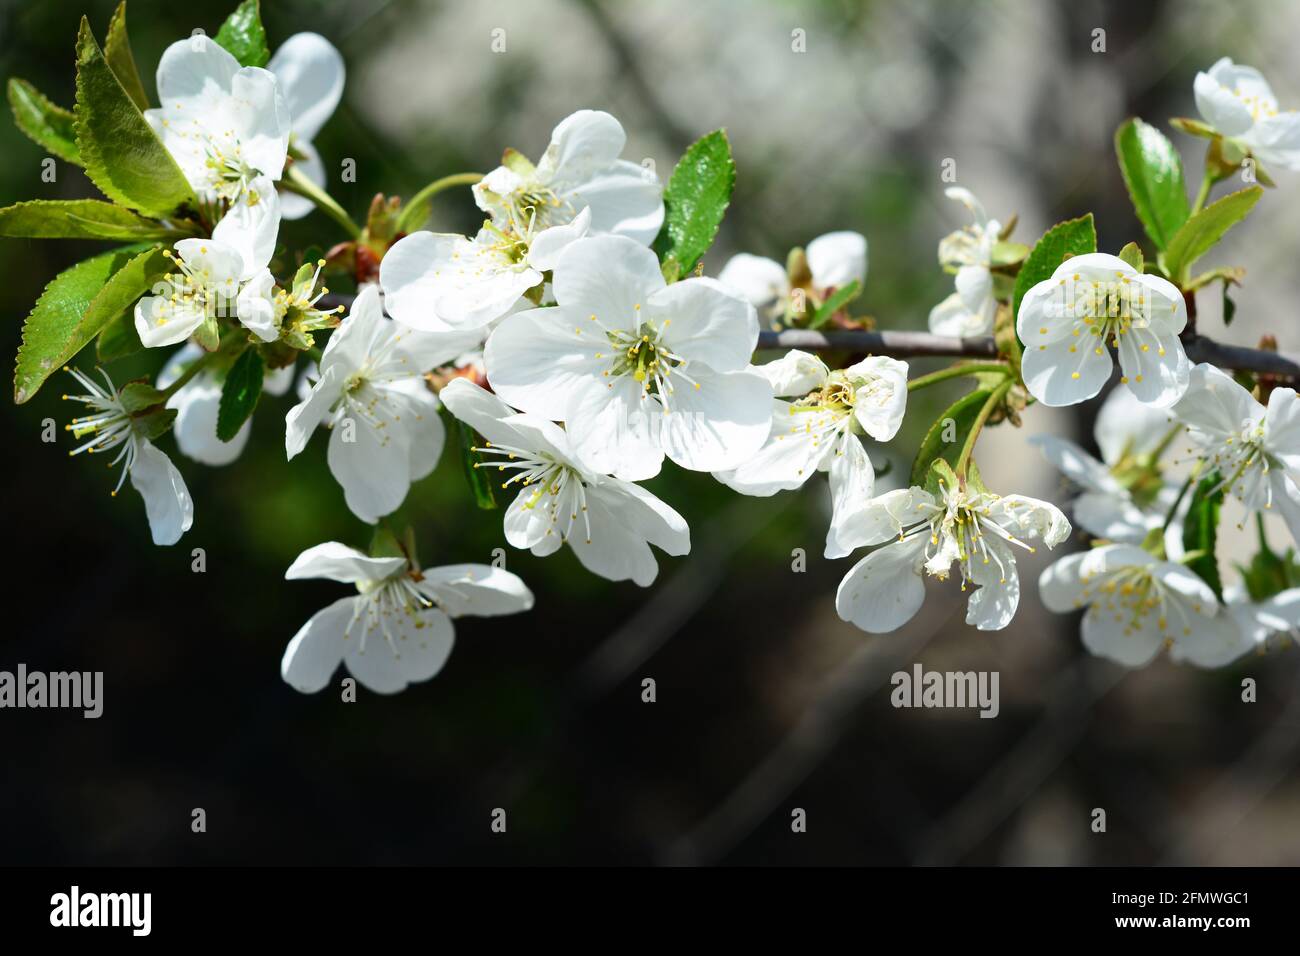 A close-up of a beautiful white cherry tree blossom. Delicate, tiny white cherry flowers with small green leaves of a cherry tree branch in spring. Stock Photo